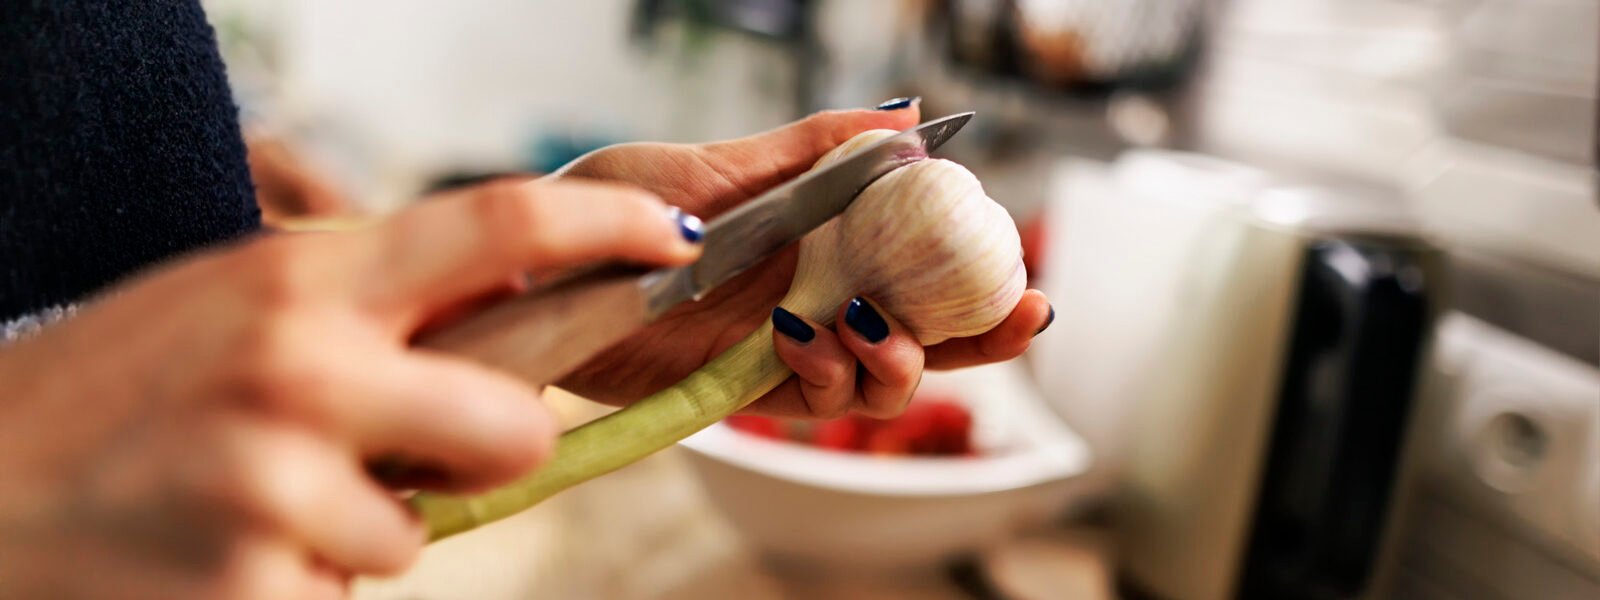 Eating Garlic Has An Unexpected Effect On Your Early Death Risk - Health Digest